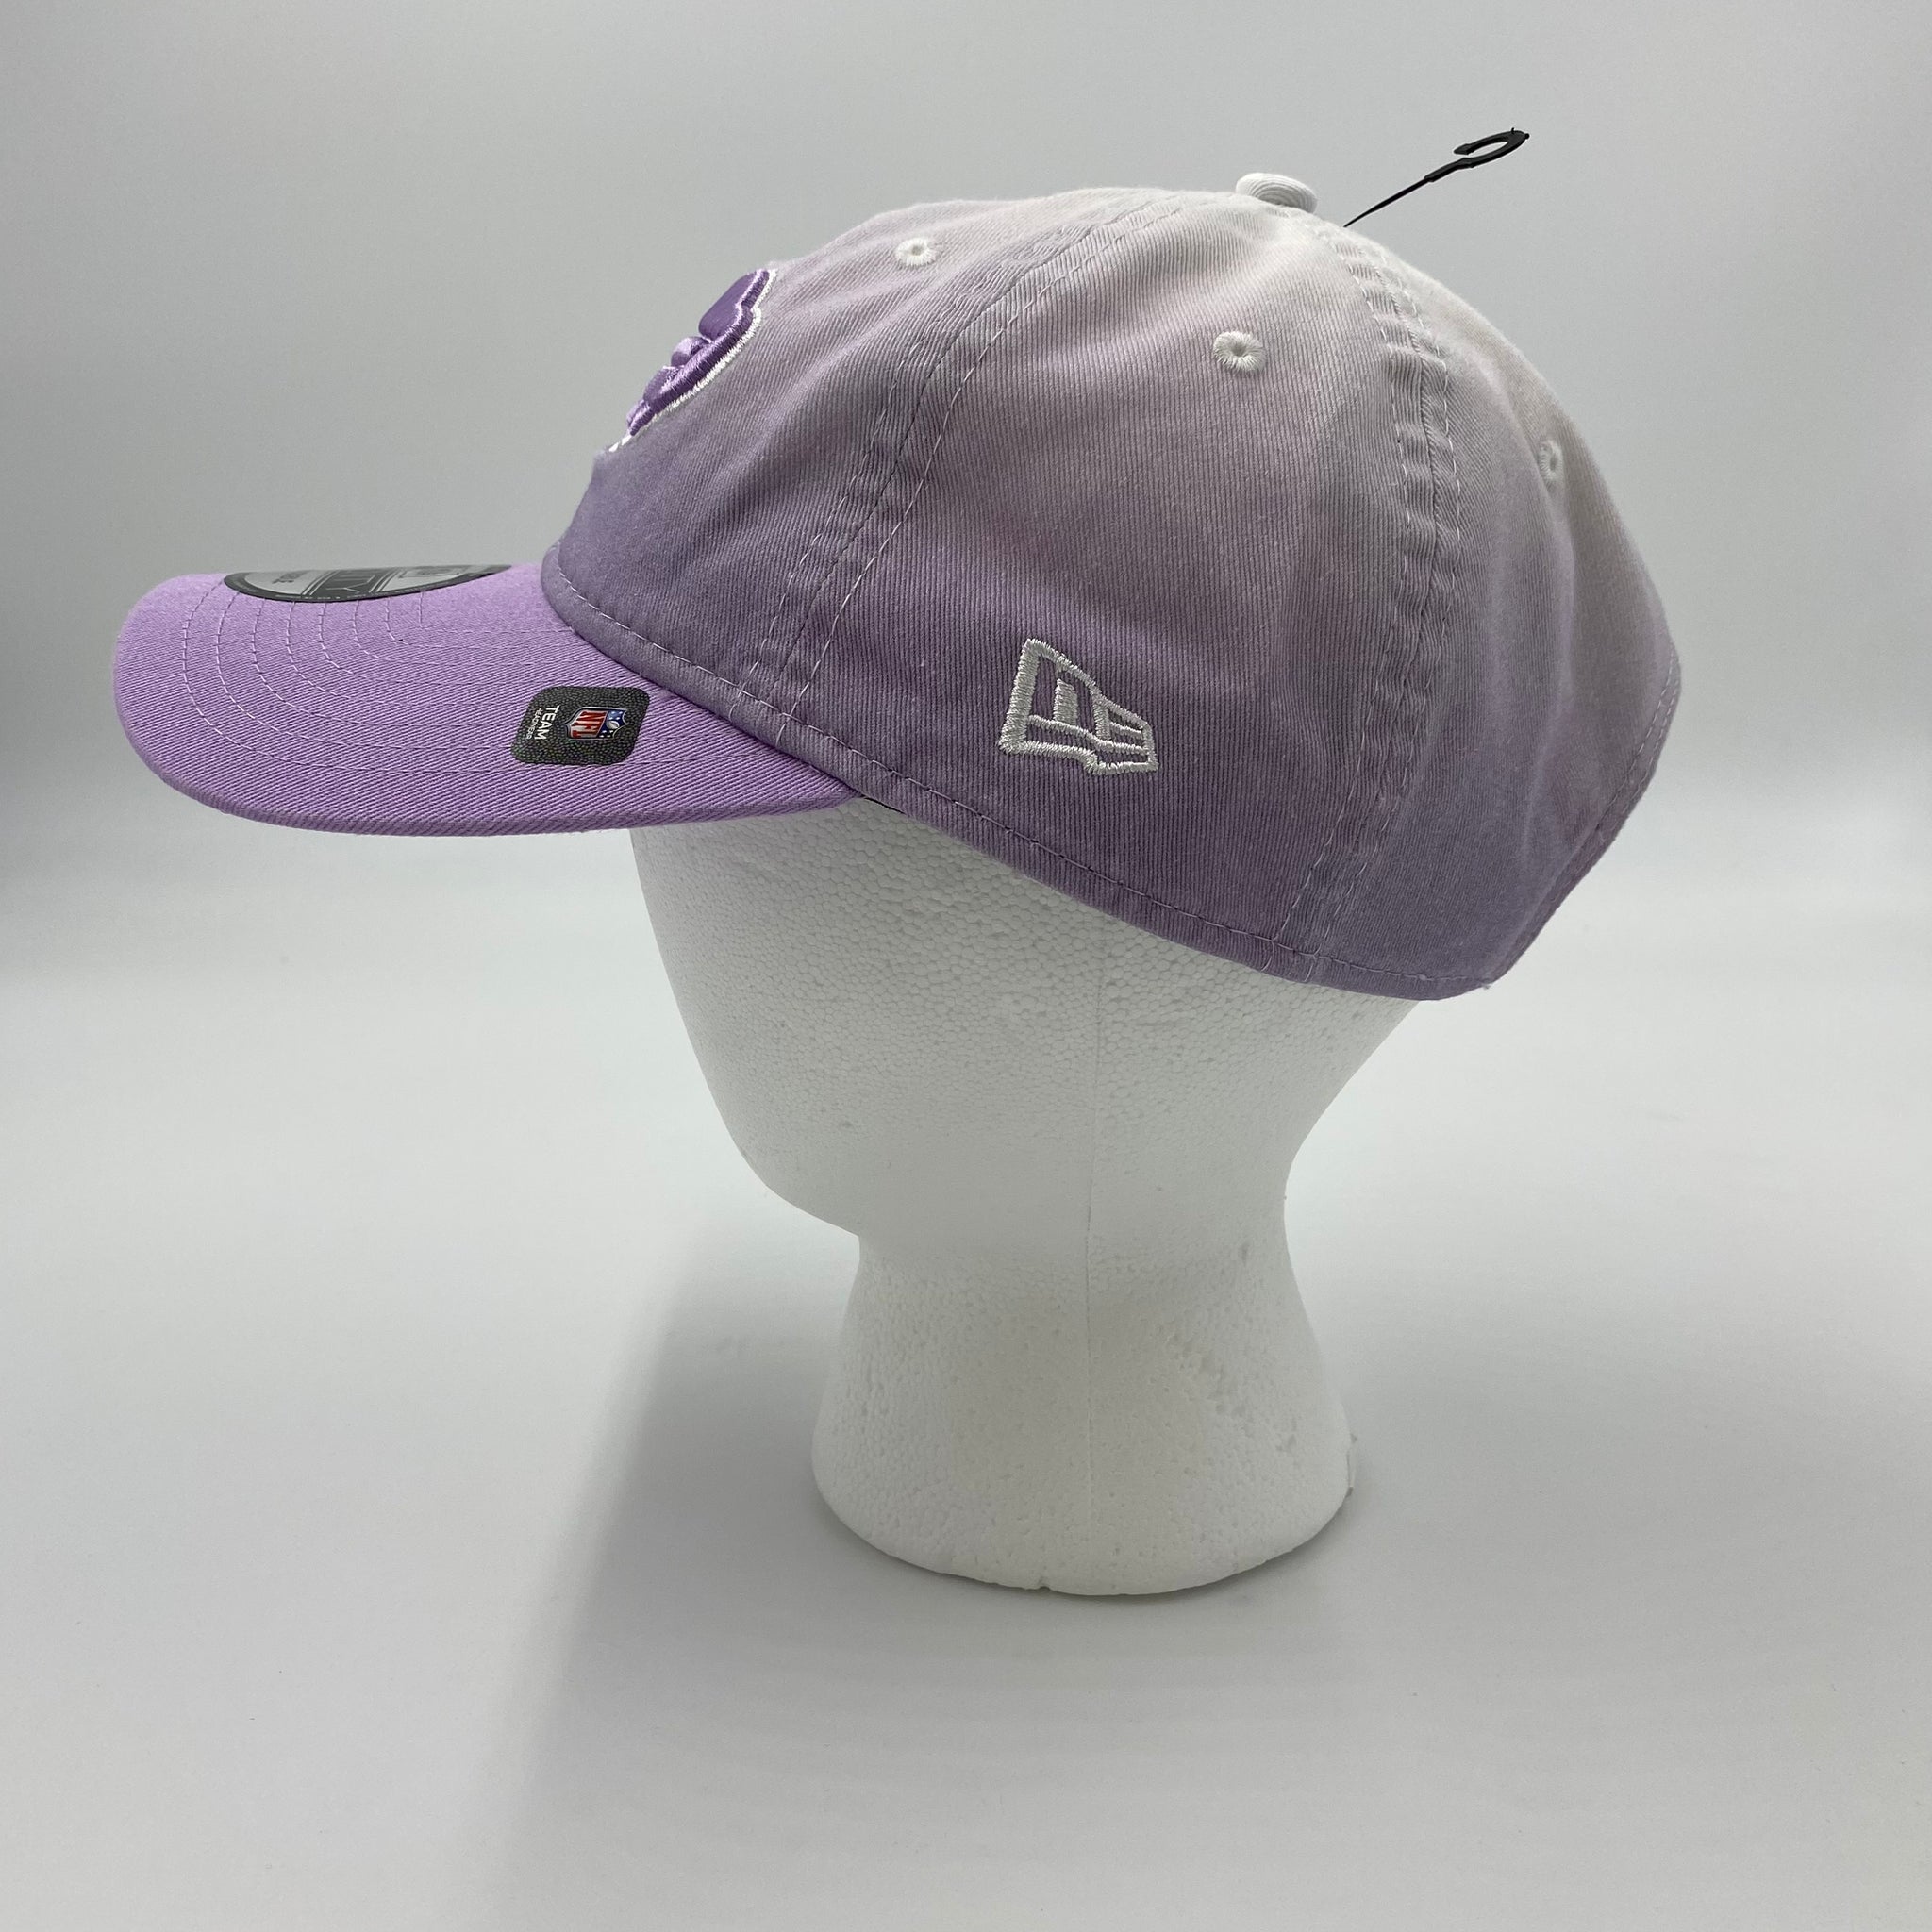 New Era Buffalo Bills Lilac and White Ombre Adjustable Hat